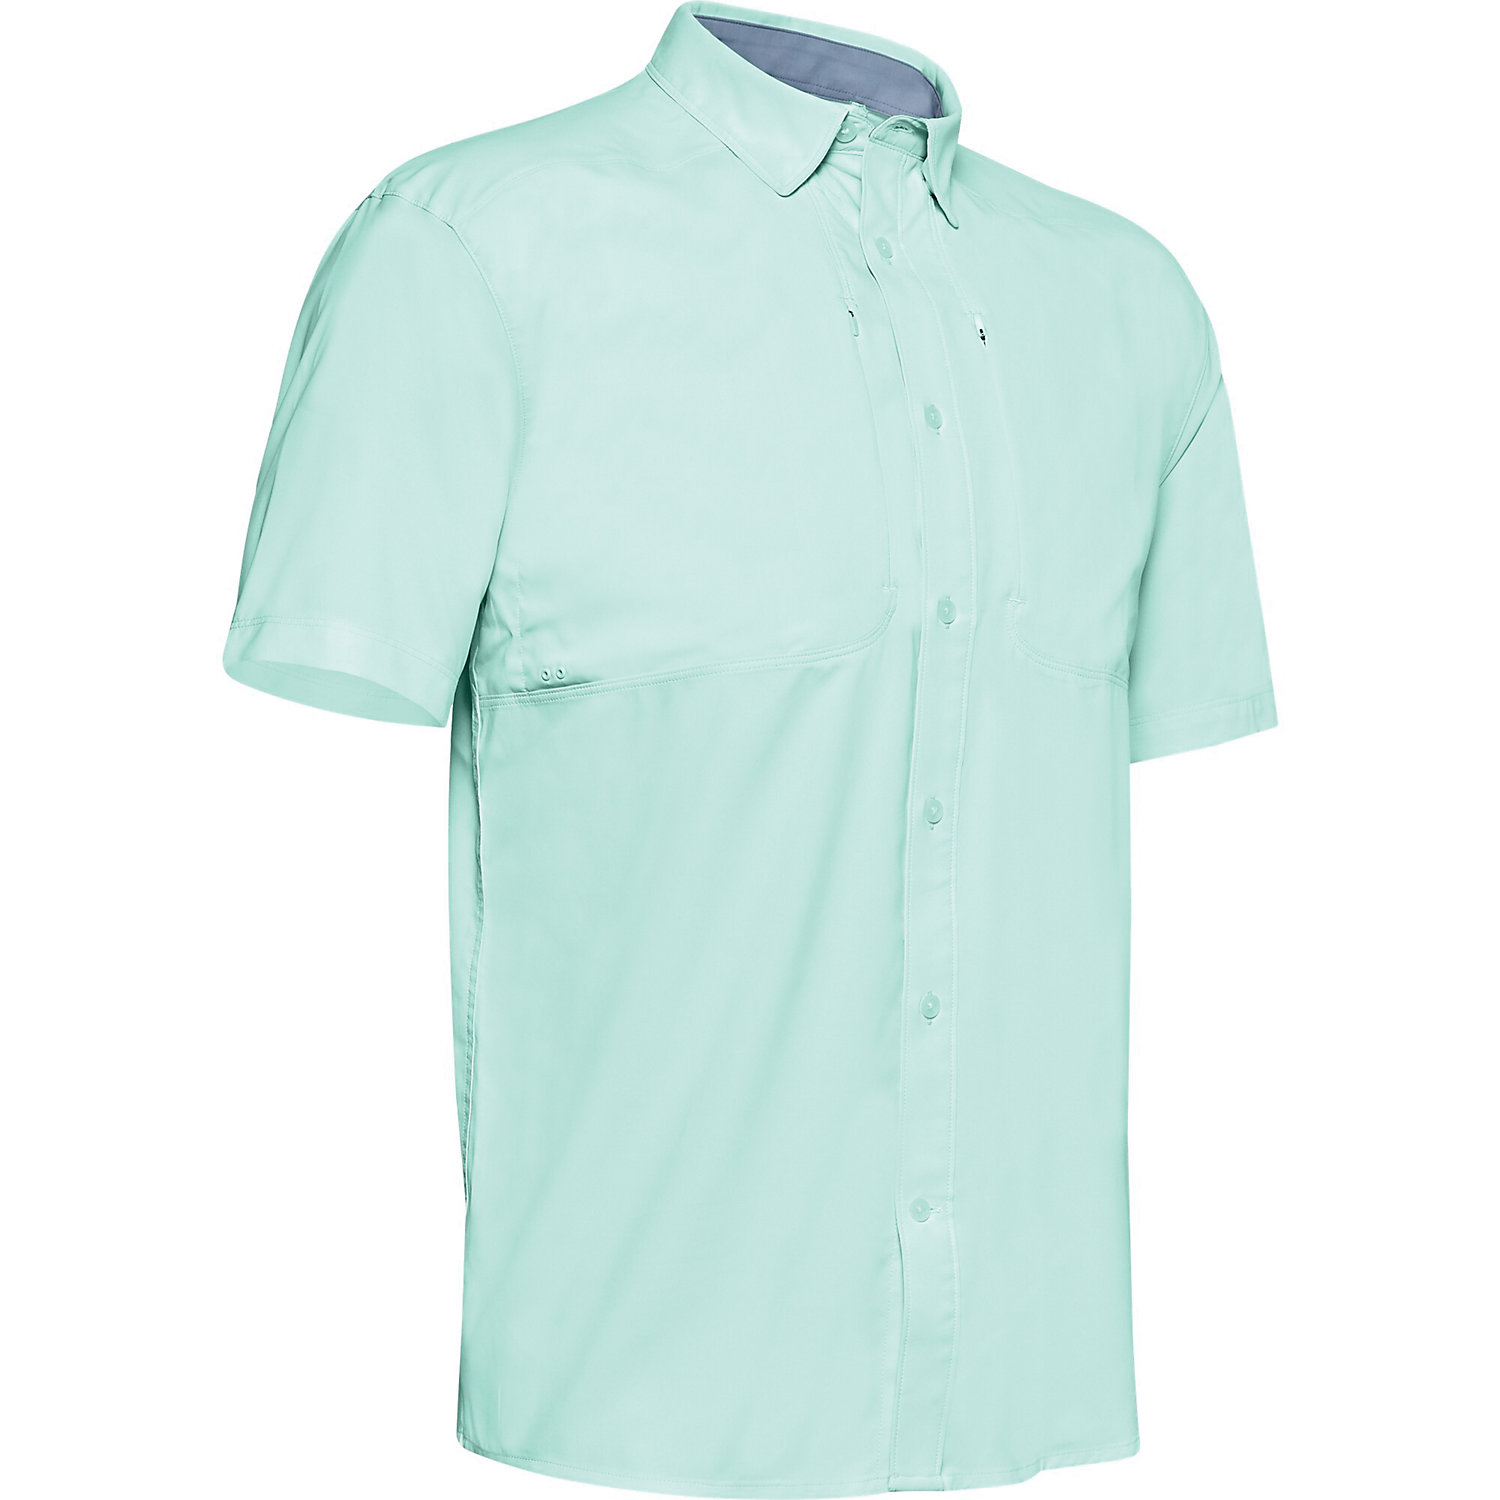 Under Armour Mens Tide Chaser 2.0 SS Shirt